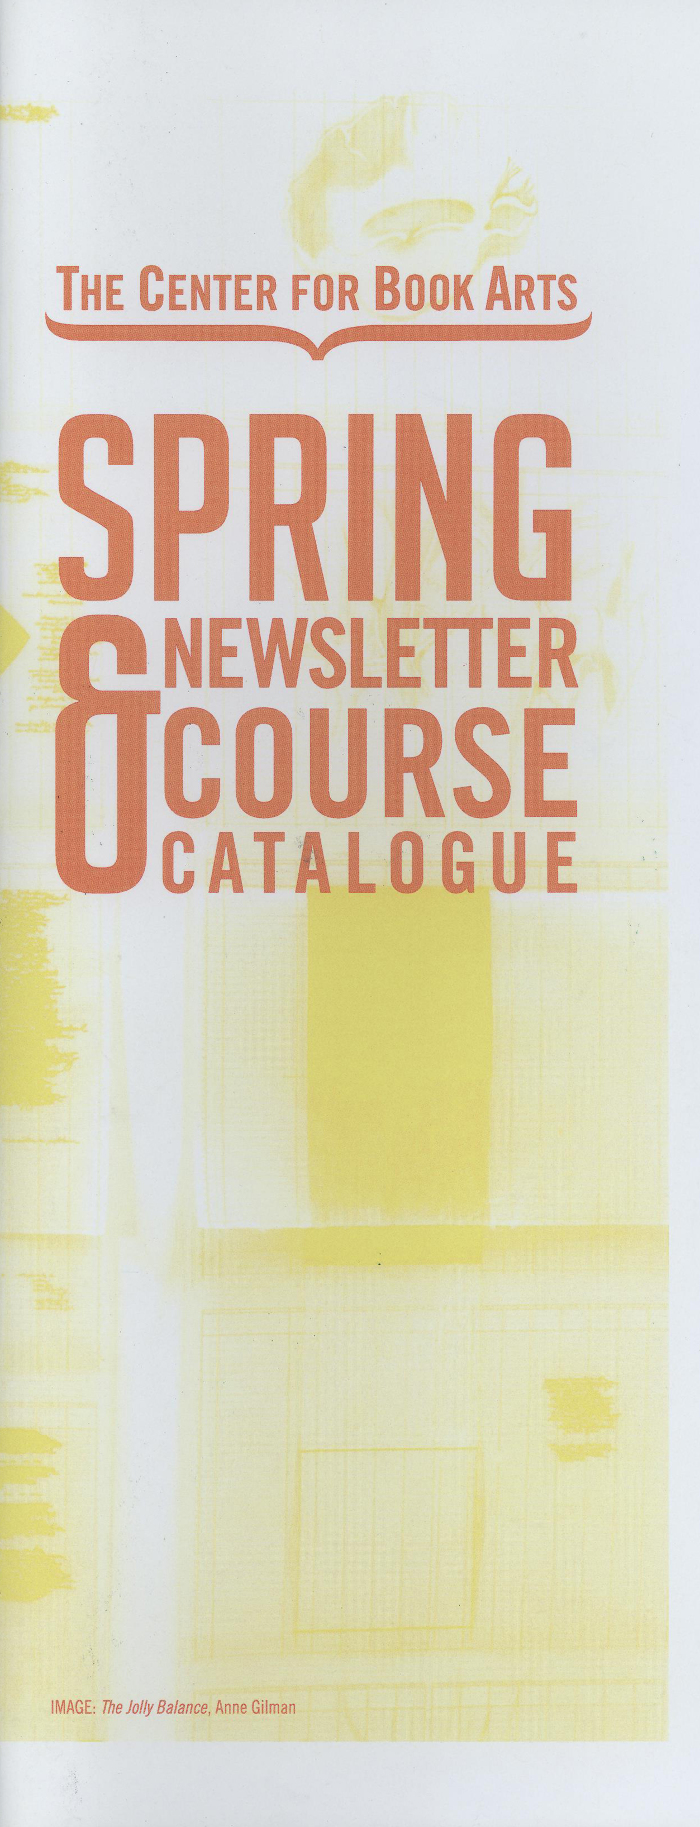 Spring 2012 Center for Book Arts' newsletter and course catalogue